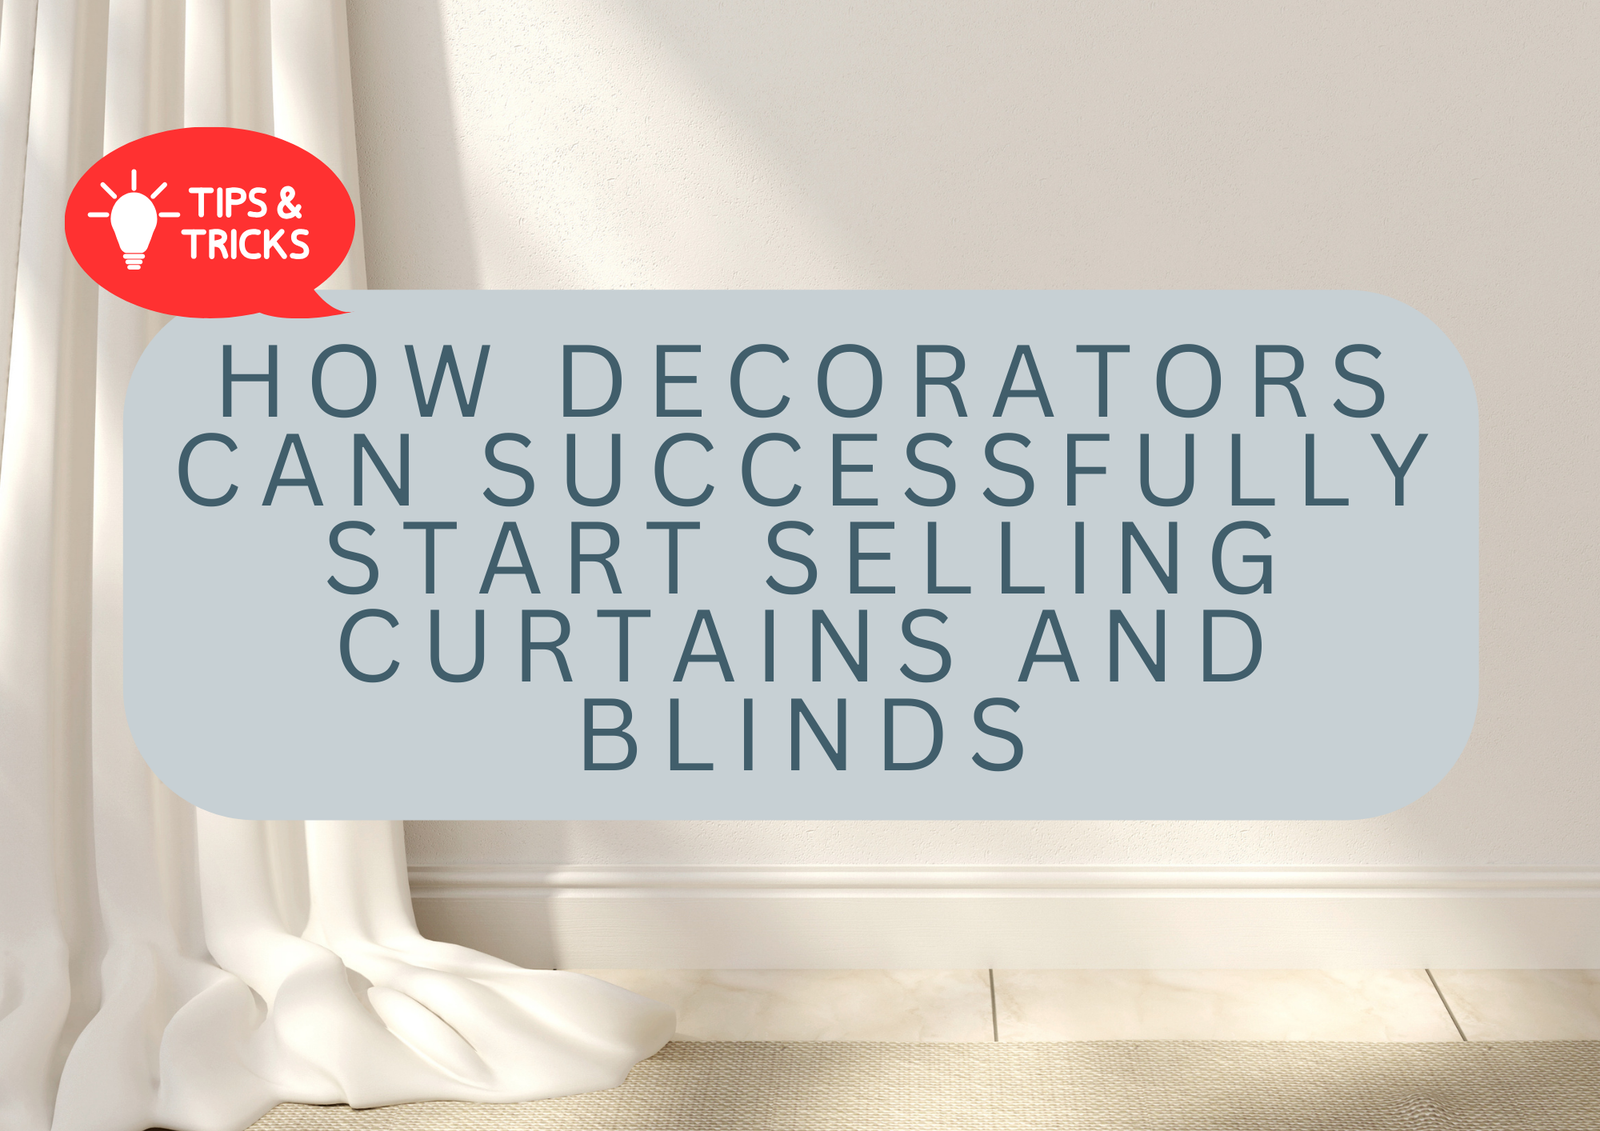 How to sell curtain and blind for decorators